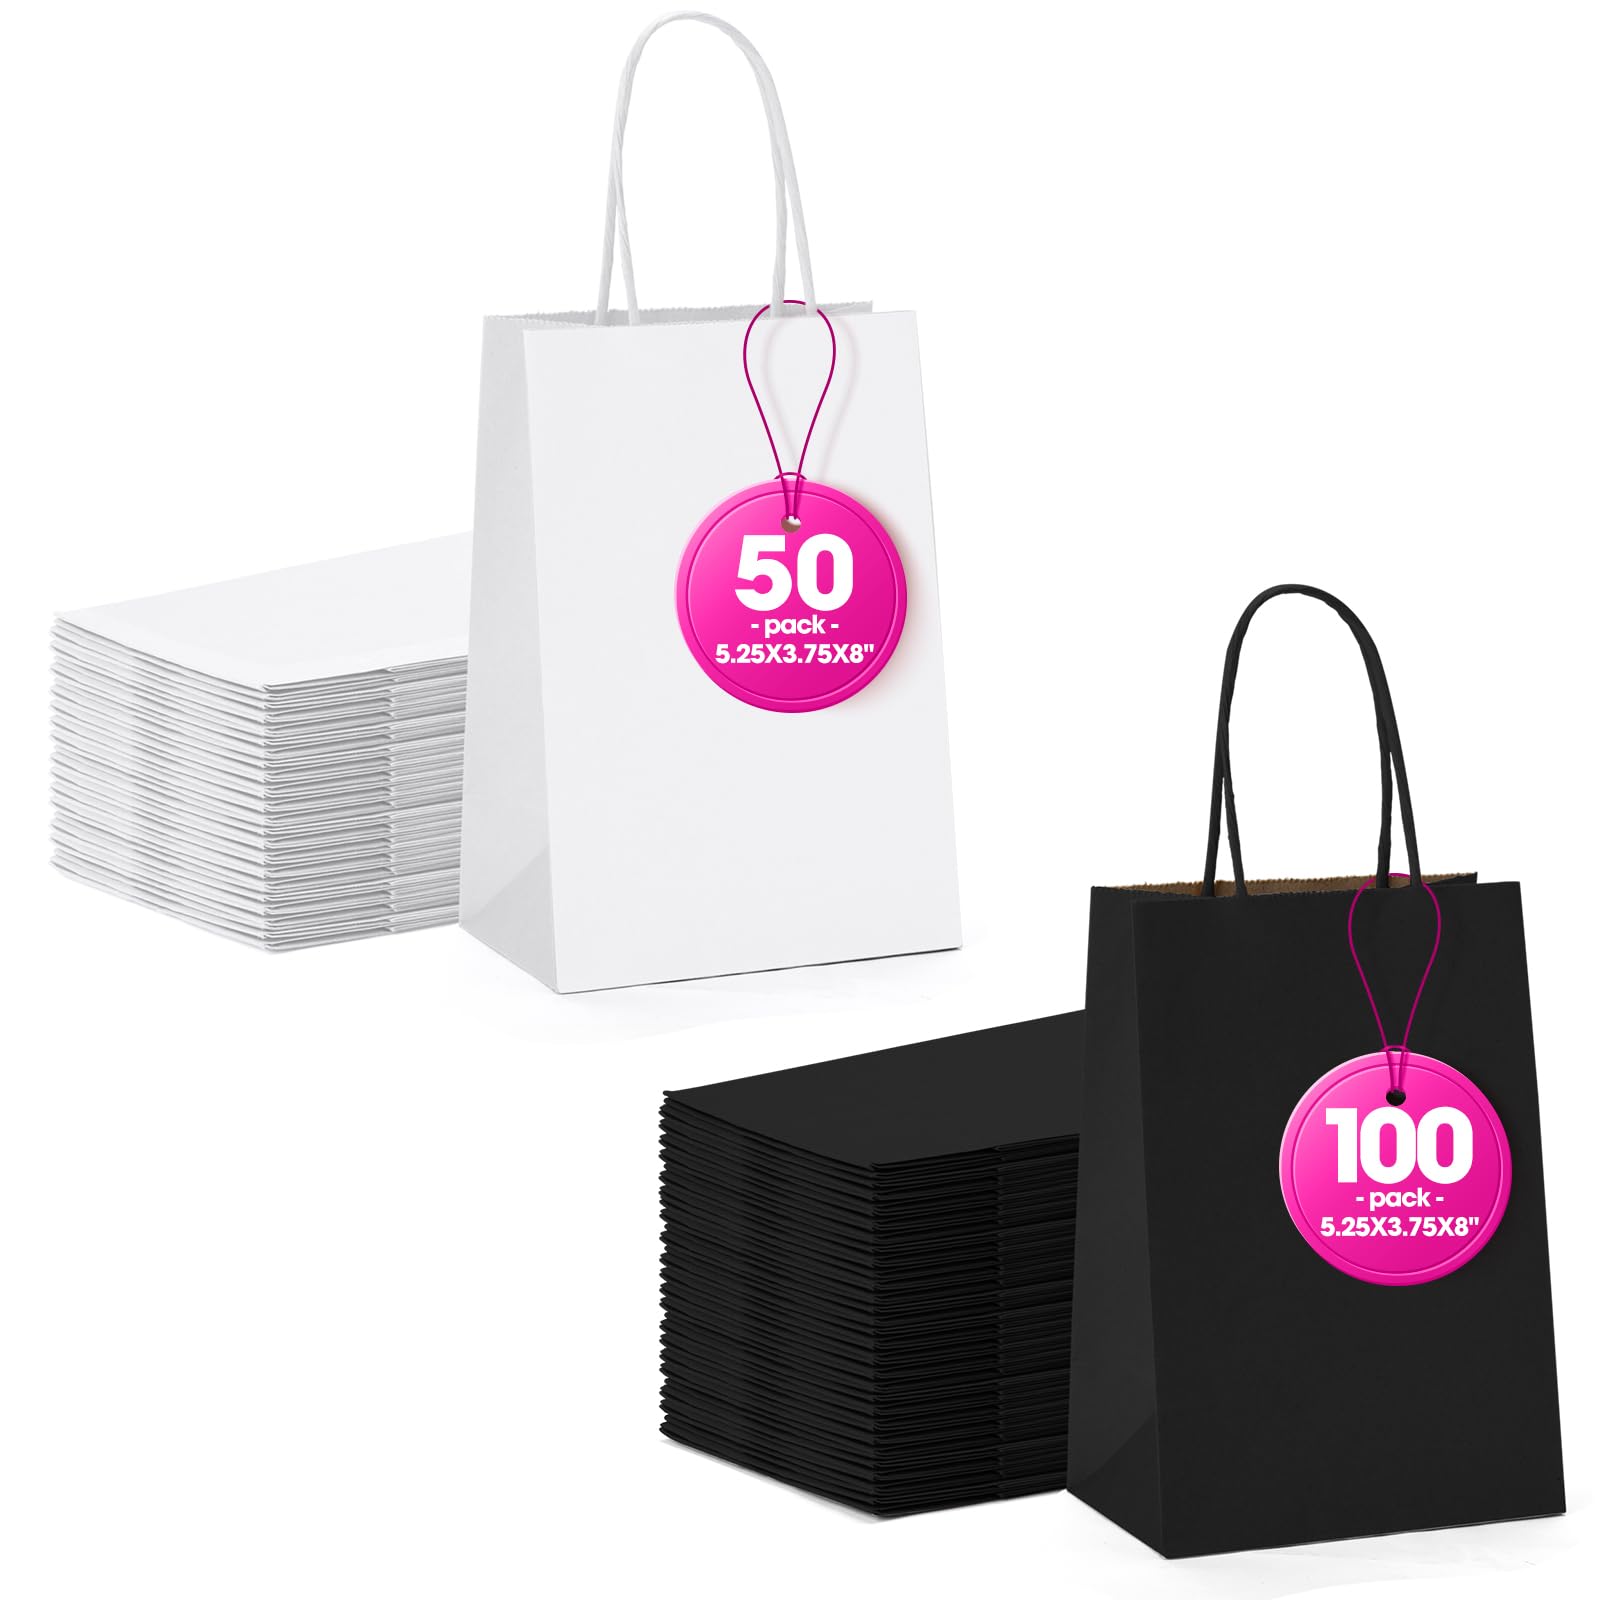 MESHA Black Gift Bags 5.25x3.75x8 Inches 100Pcs & 50Pcs White Paper Bags with Handles Small Shopping Bags,Wedding Party Favor Bags